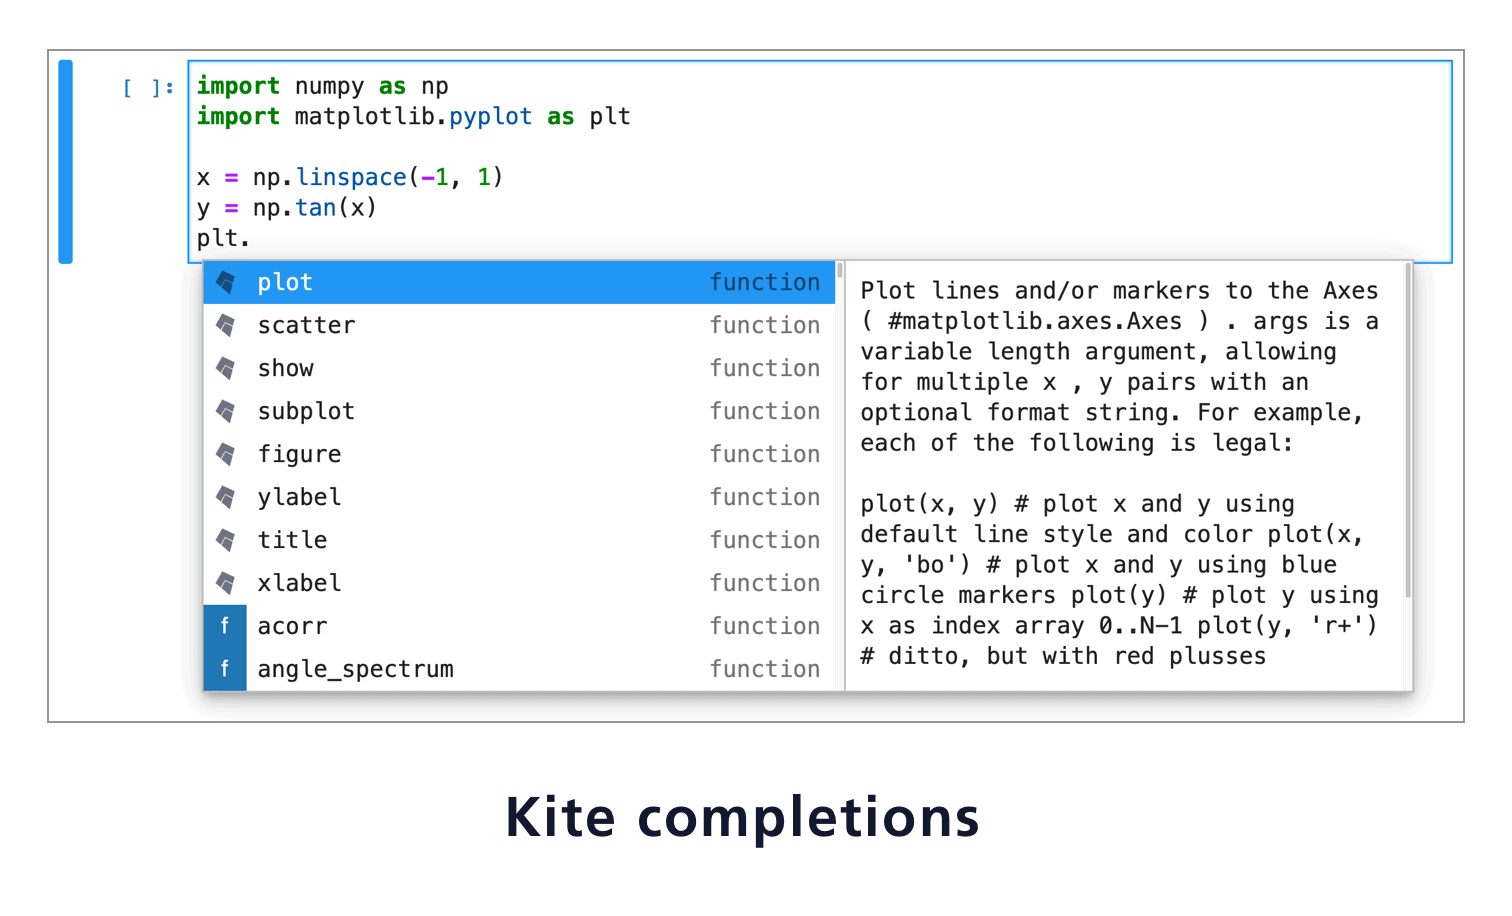 JupyterLab with Kite completions and docs panel screenshot